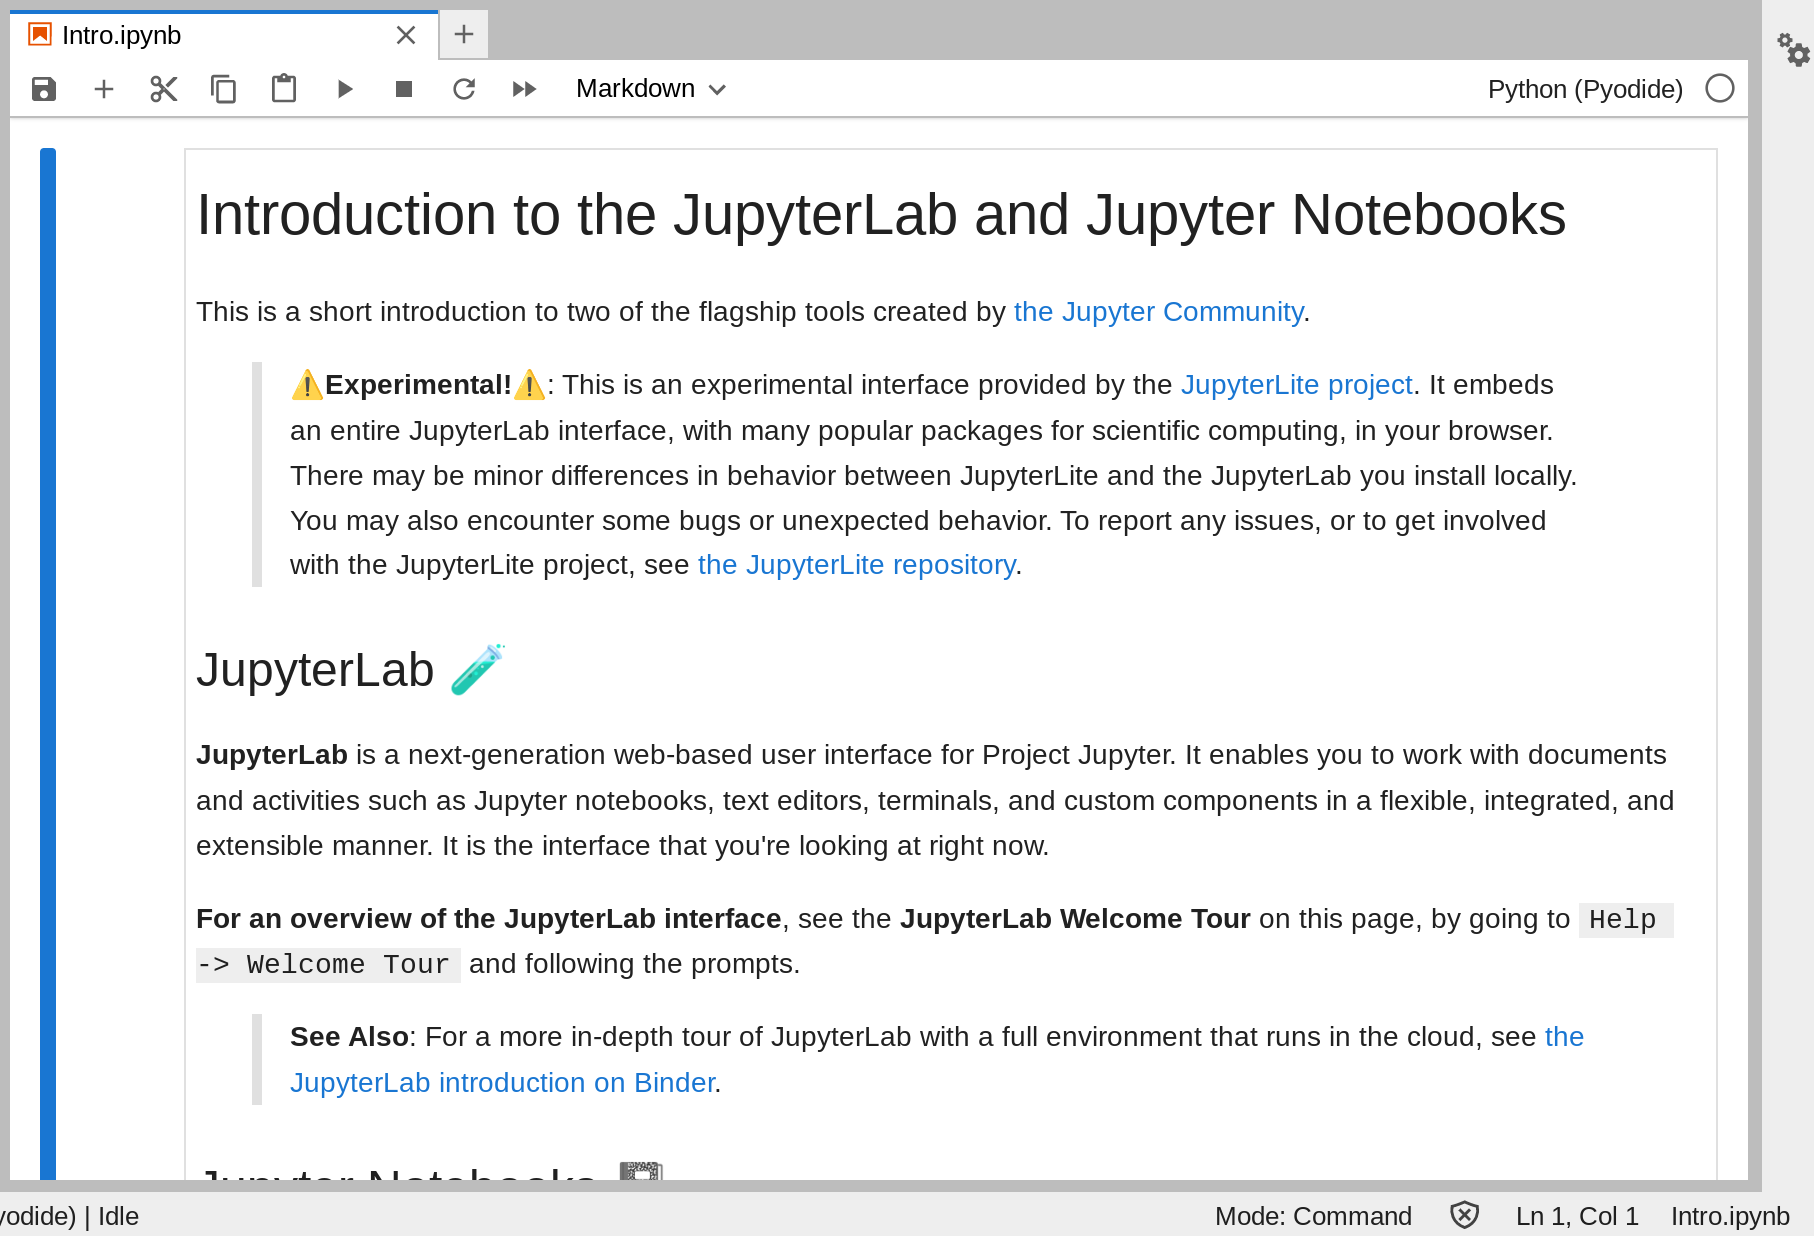 An introduction to Jupyter.